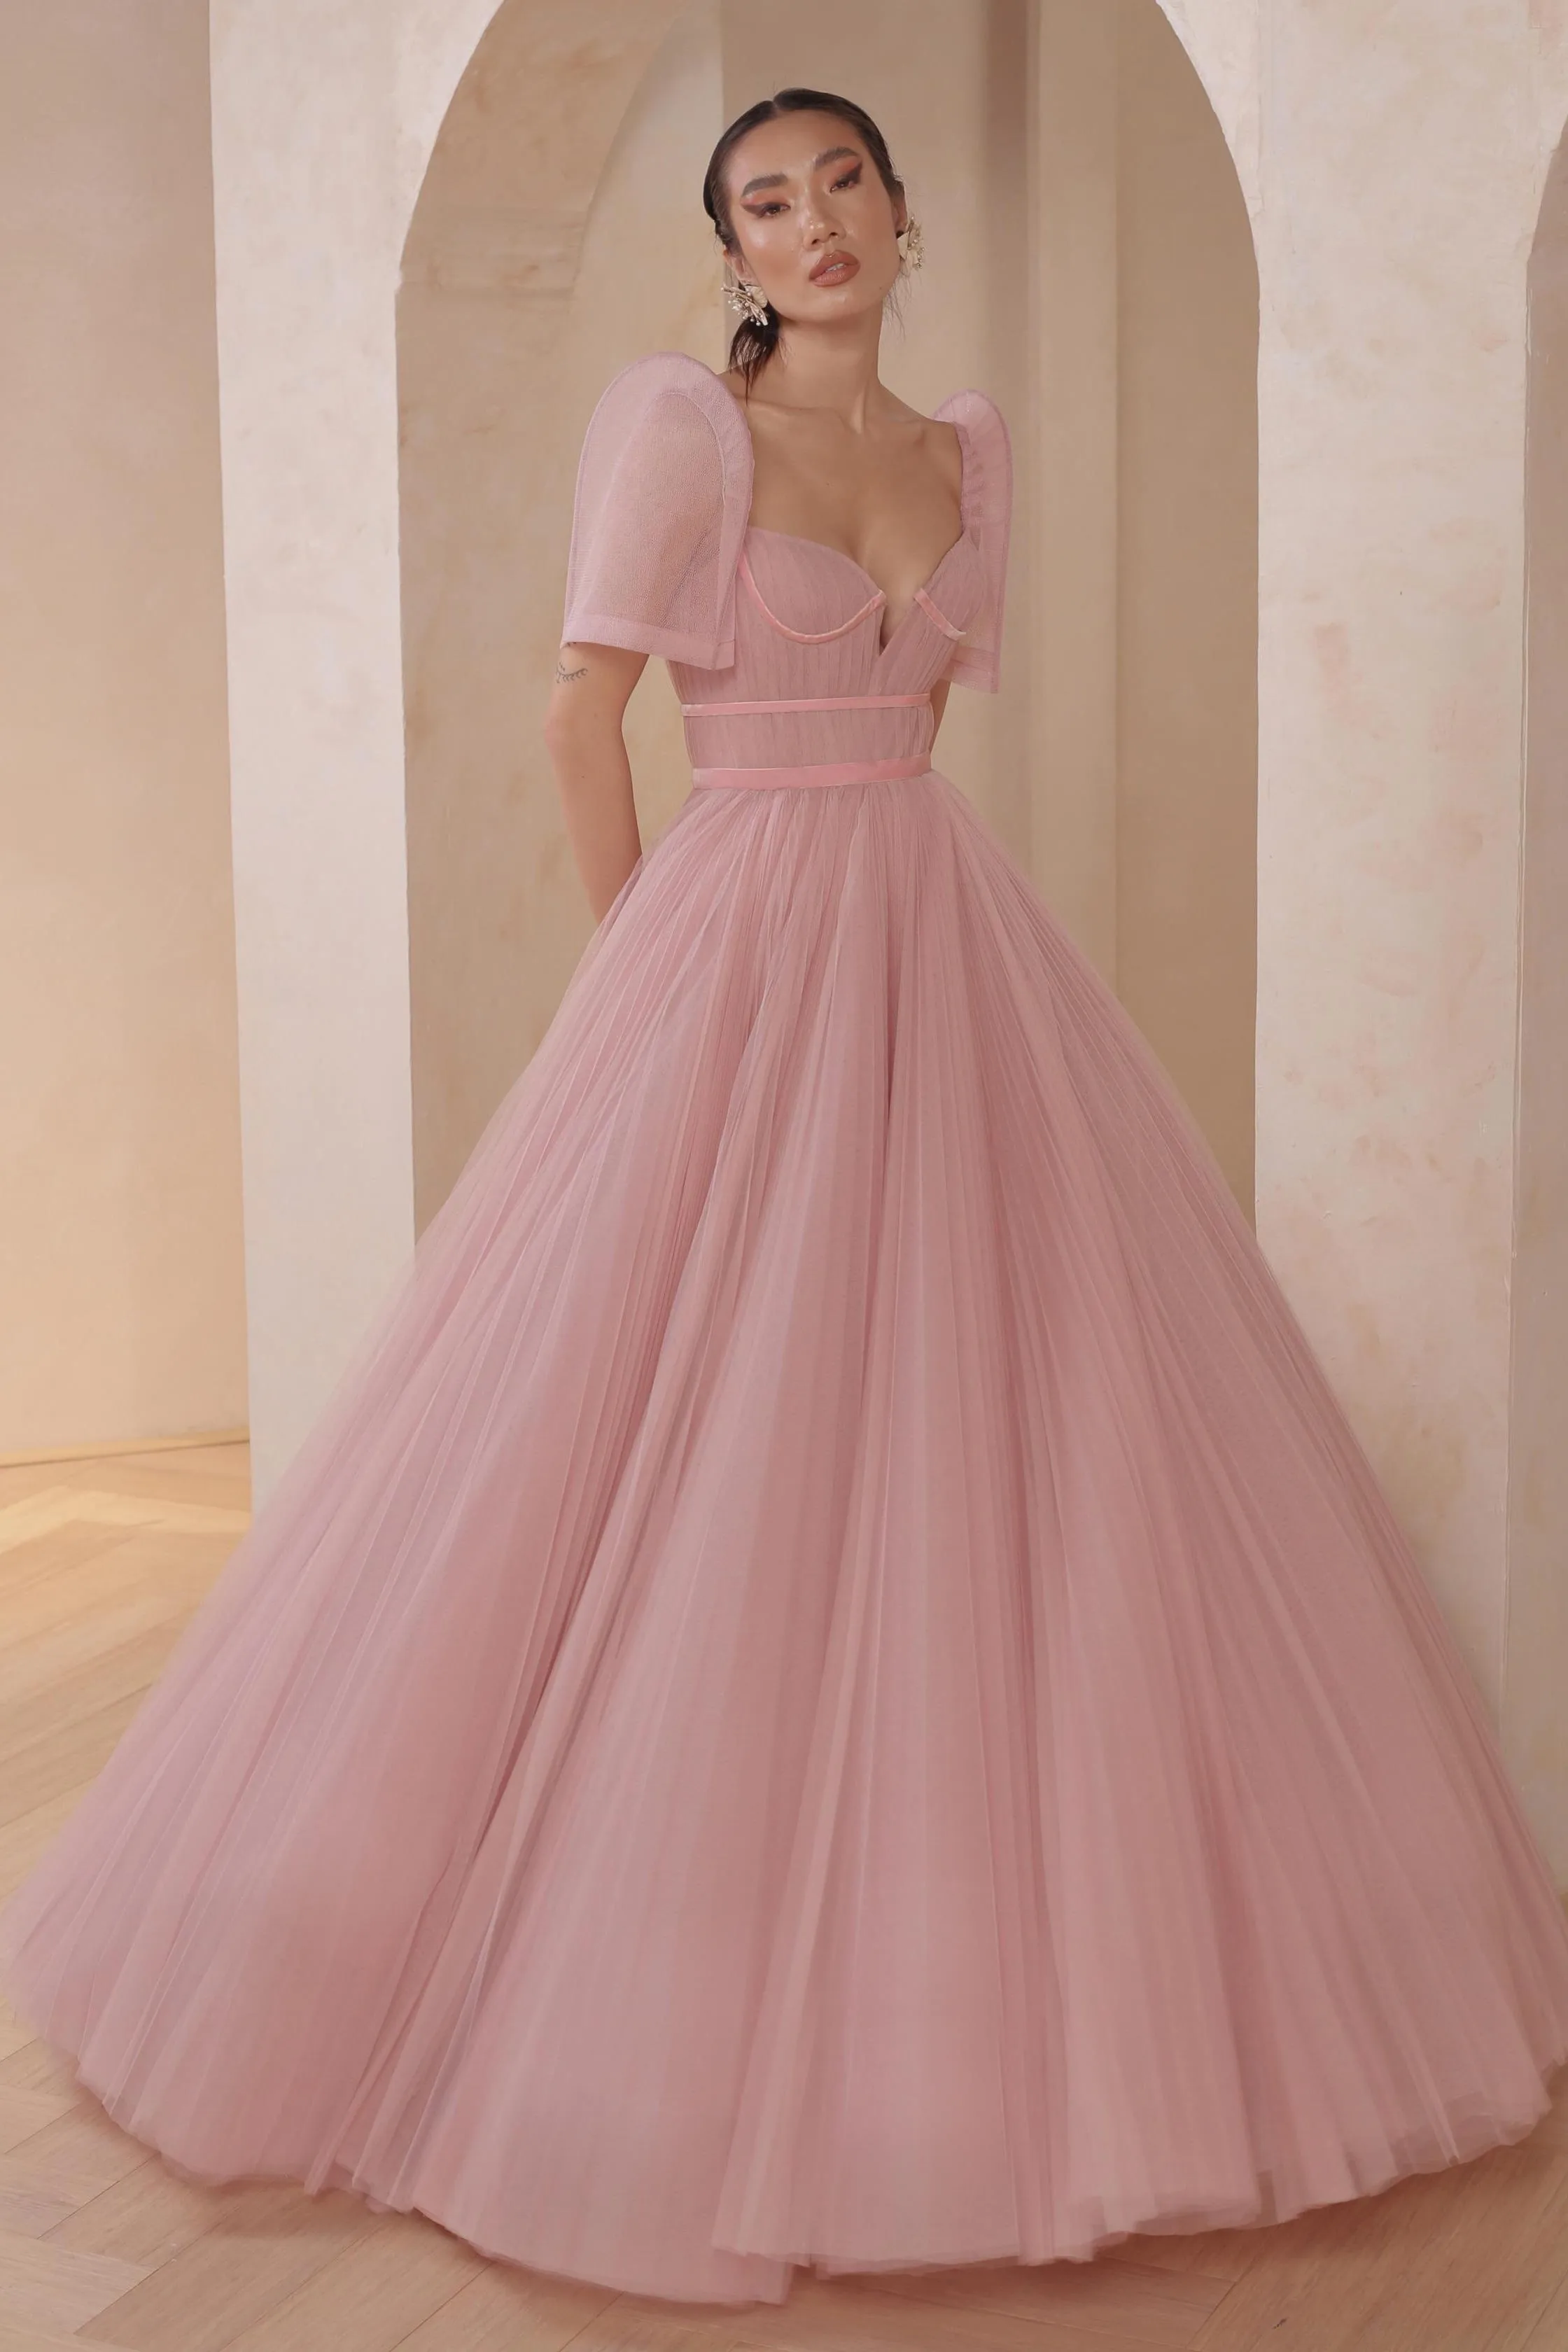 

Blush Pink A-line Long Tulle Maxi Gowns To Event Prom See Thru Short Puffy Sleeves Pretty Women Party Dresses Bridal Dress